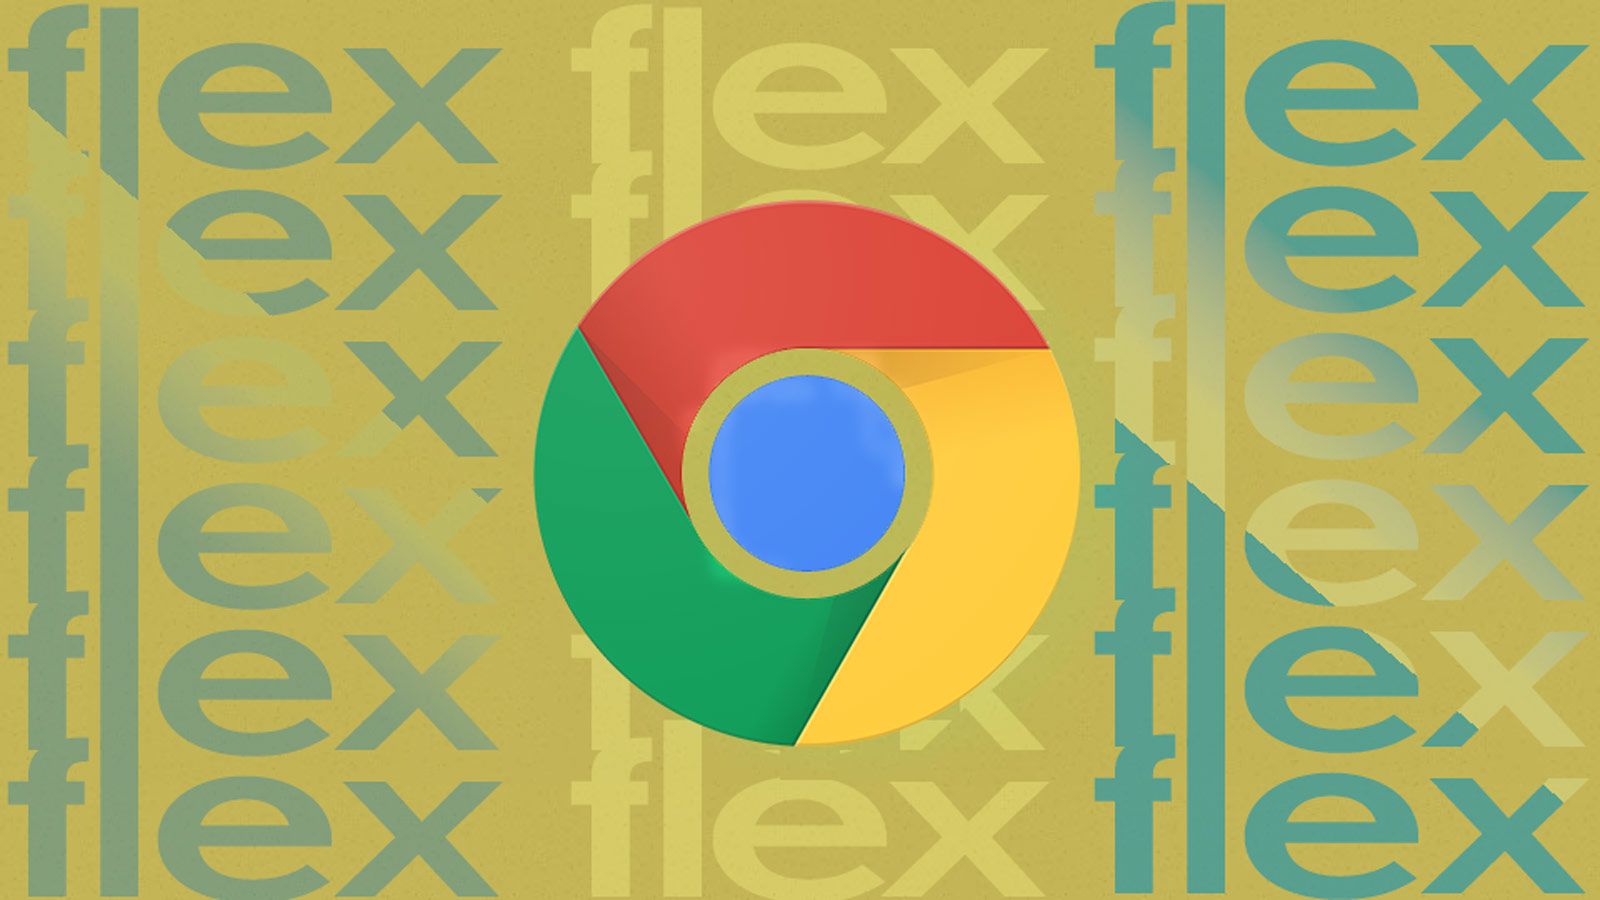 An illustration with the Google ball icon against a yellow background with the text "flex" repeated multiple times.